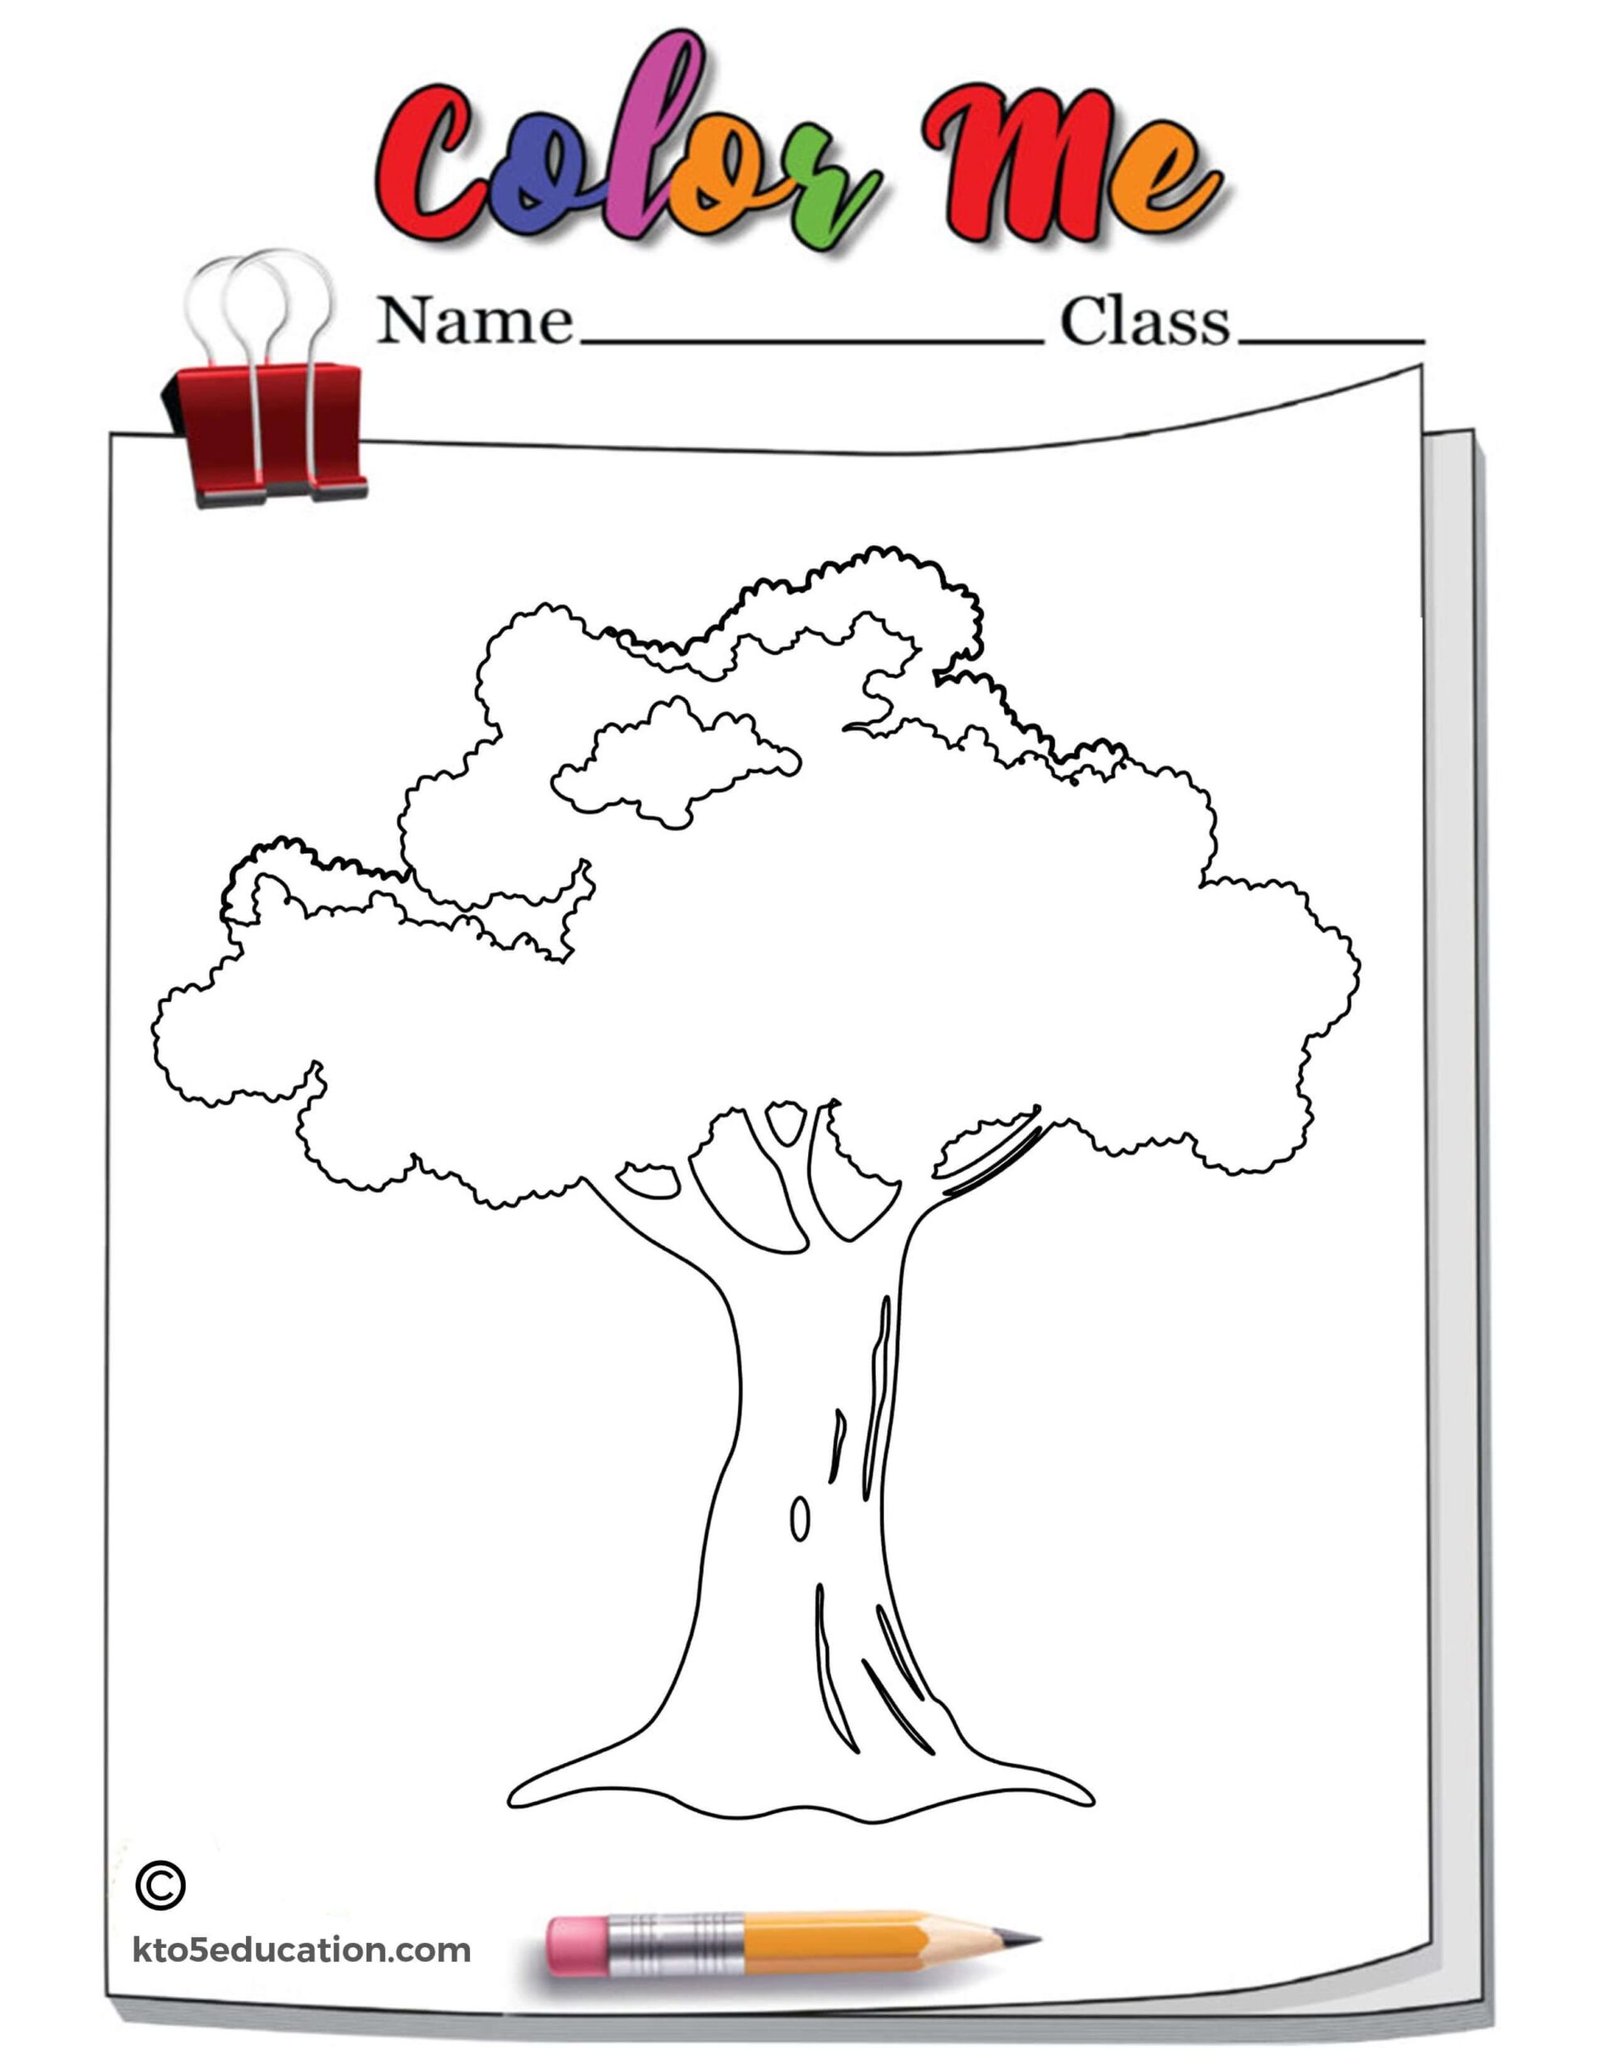 Maple Tree Outline Coloring Page